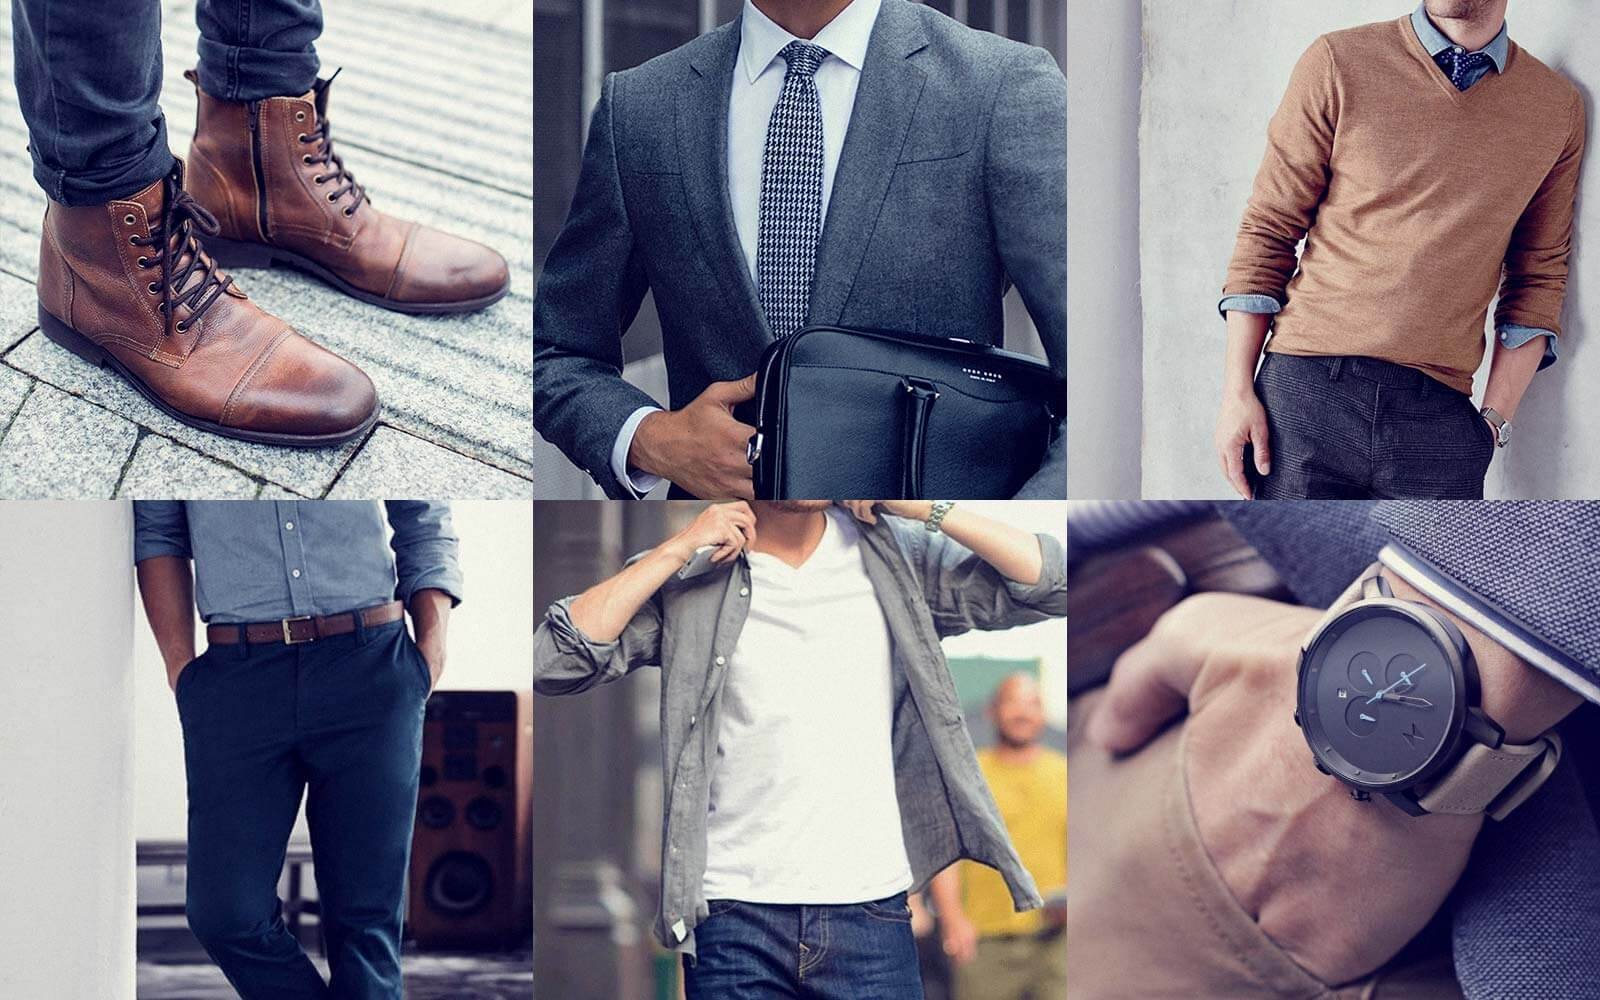 6 Outfits Guys Find Attractive